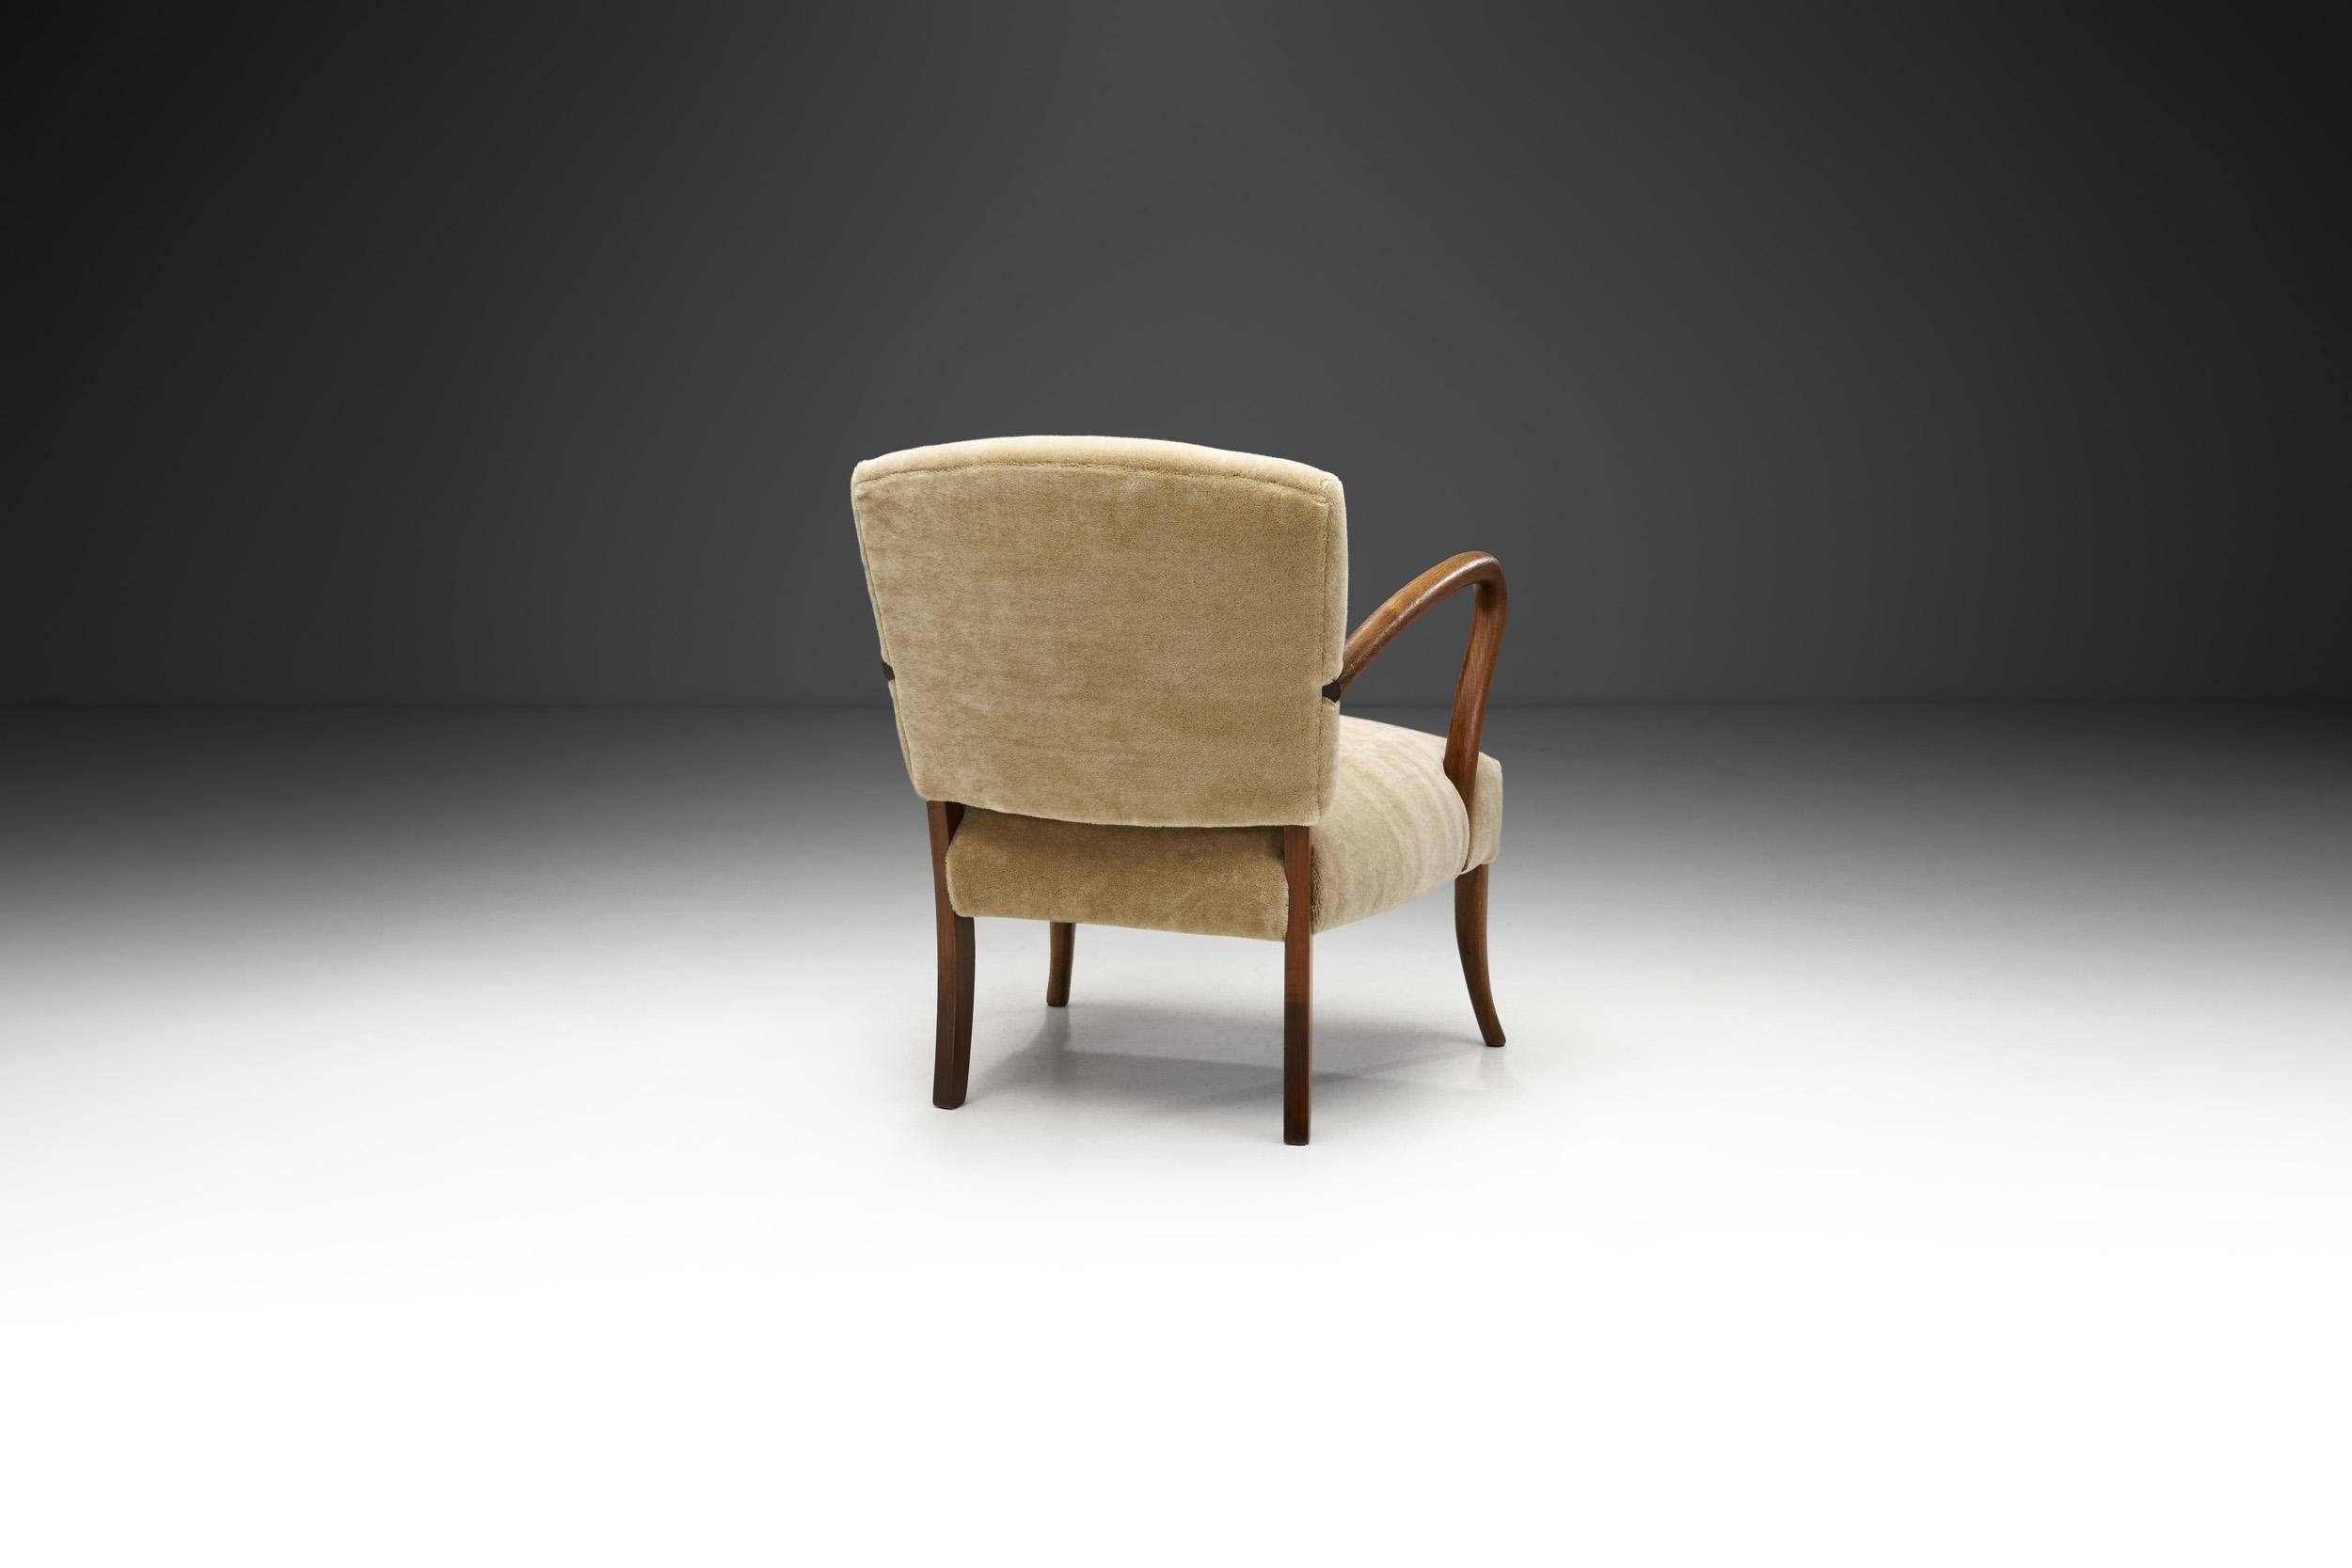 European Sculptural Armchair with Curved Arms, Europe ca 1950s For Sale